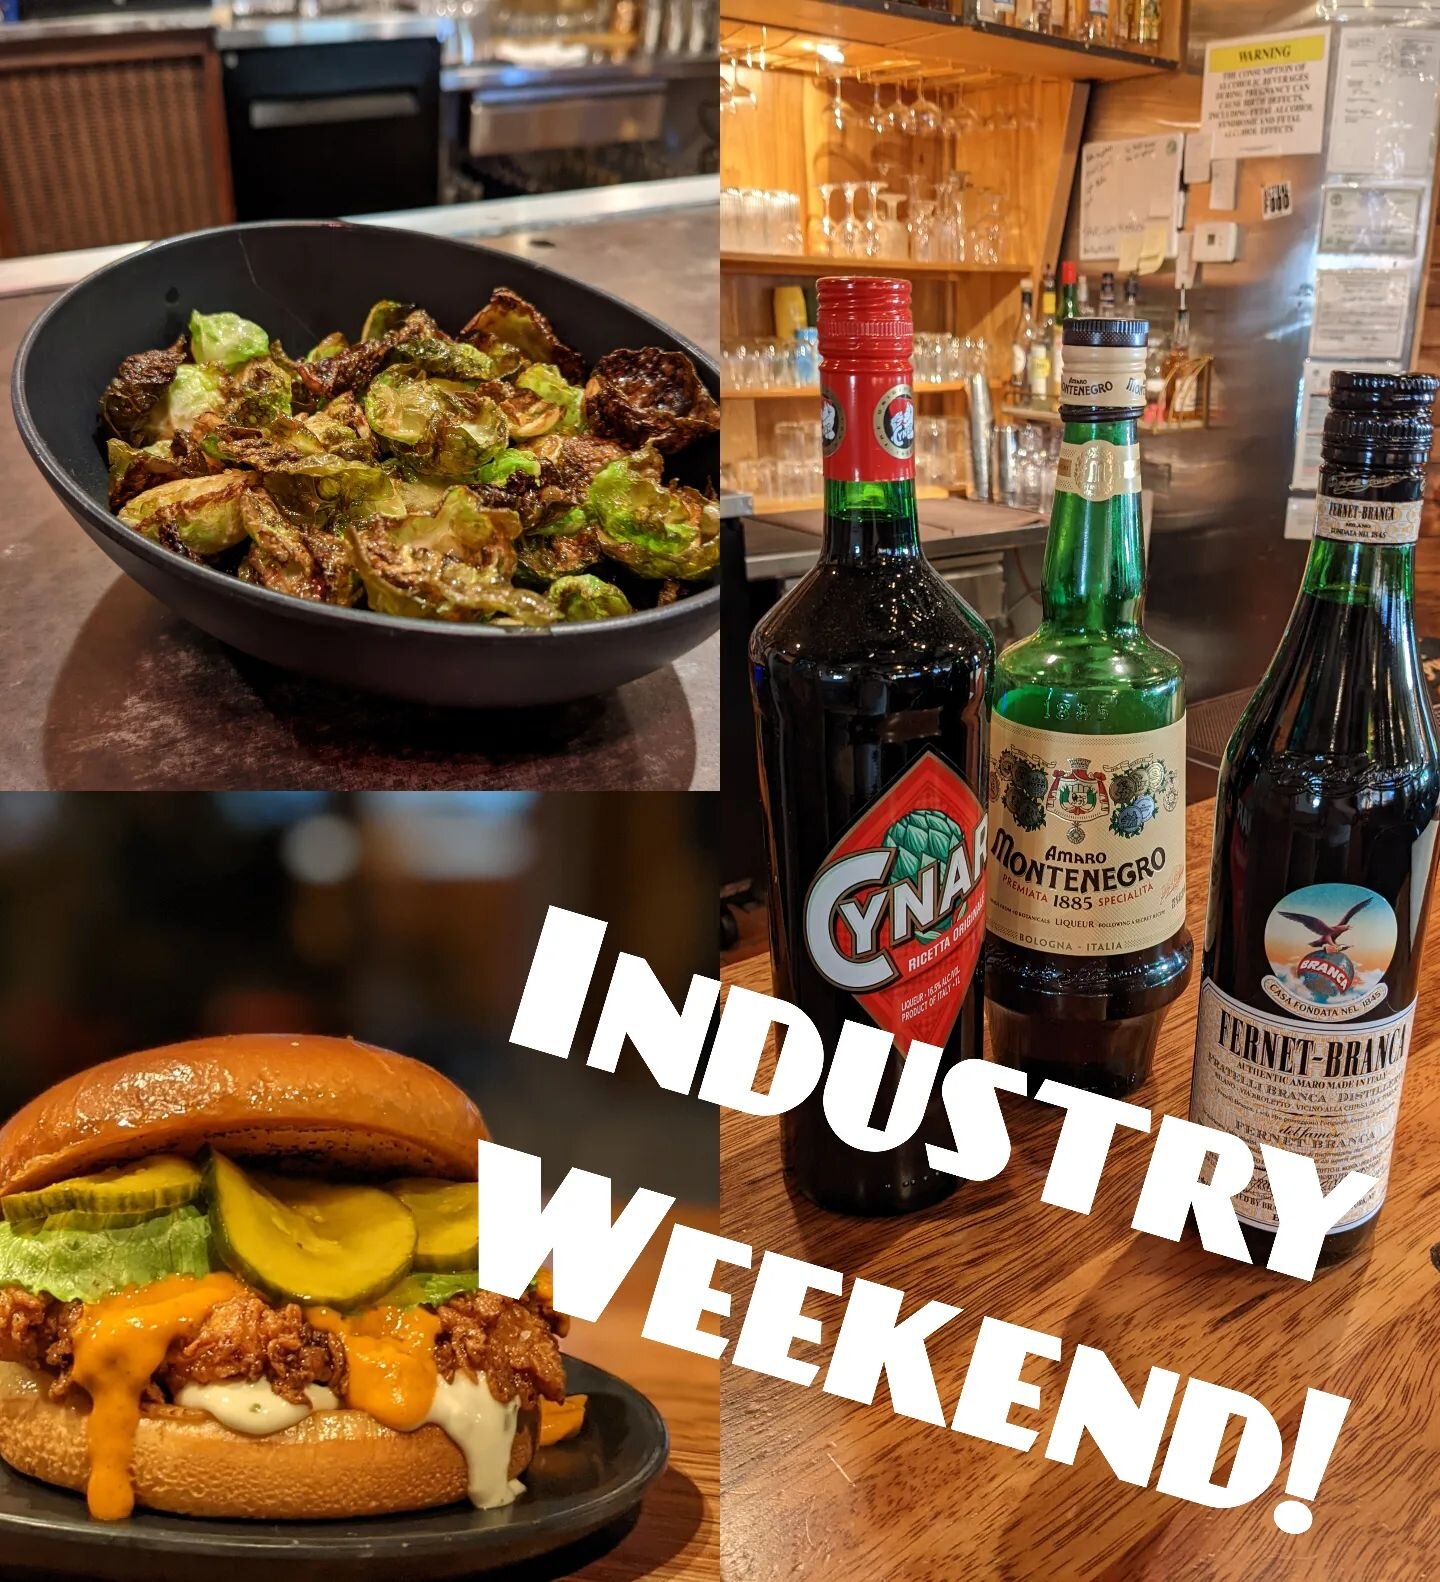 Mondays and Tuesdays catch some killer specials to celebrate the service industry weekend!

$2 off chicken sammies, brussels, Fernet, Cynar, and Montenegro

All welcome to partake!